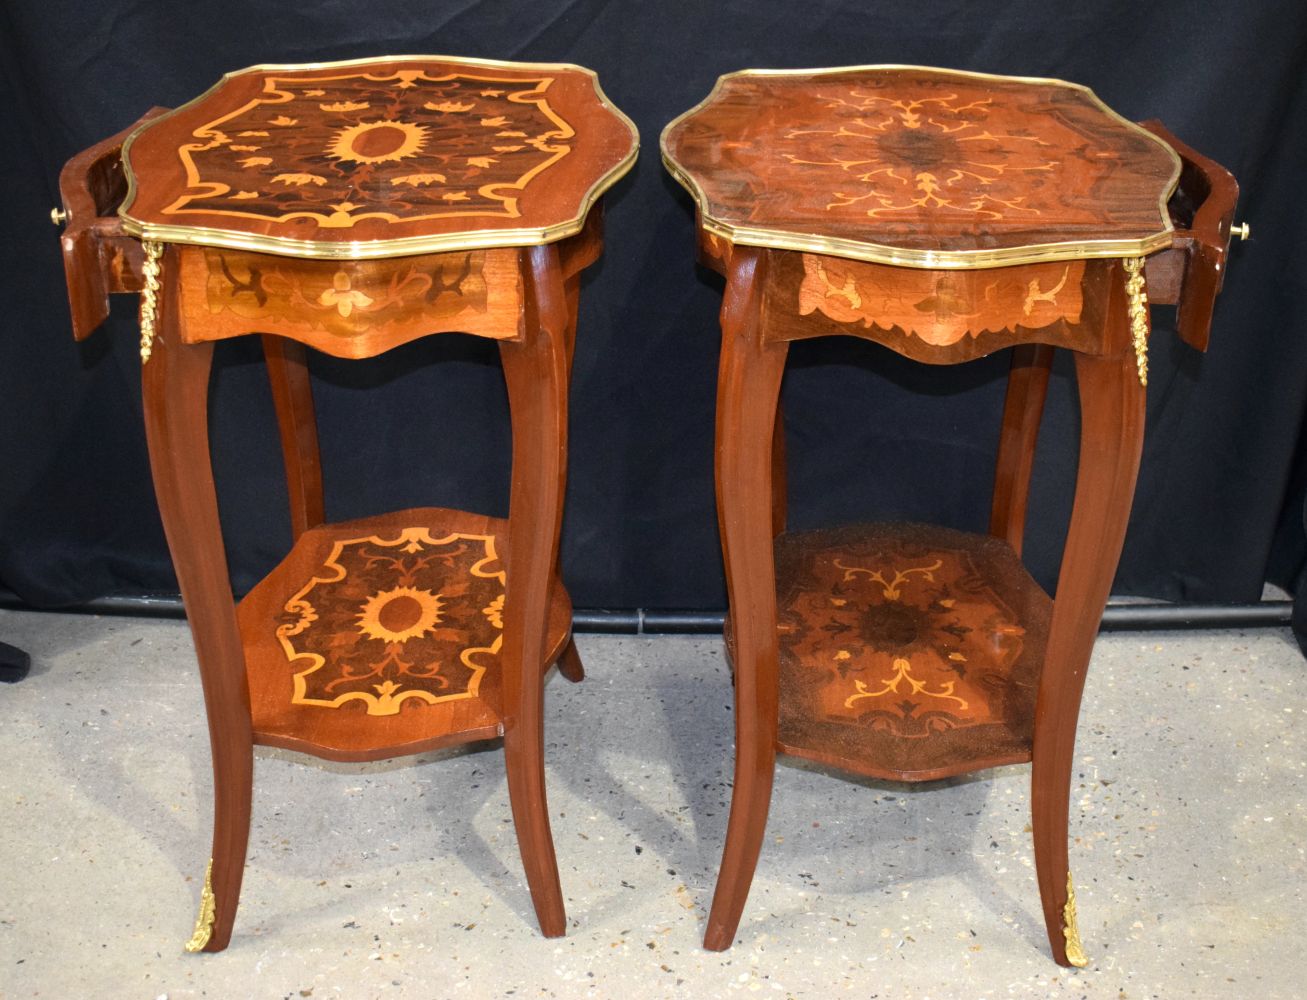 A near pair of Baroque style inlaid Oval 1 drawer tables 72 x 62 x 47 cm (2) - Image 6 of 8